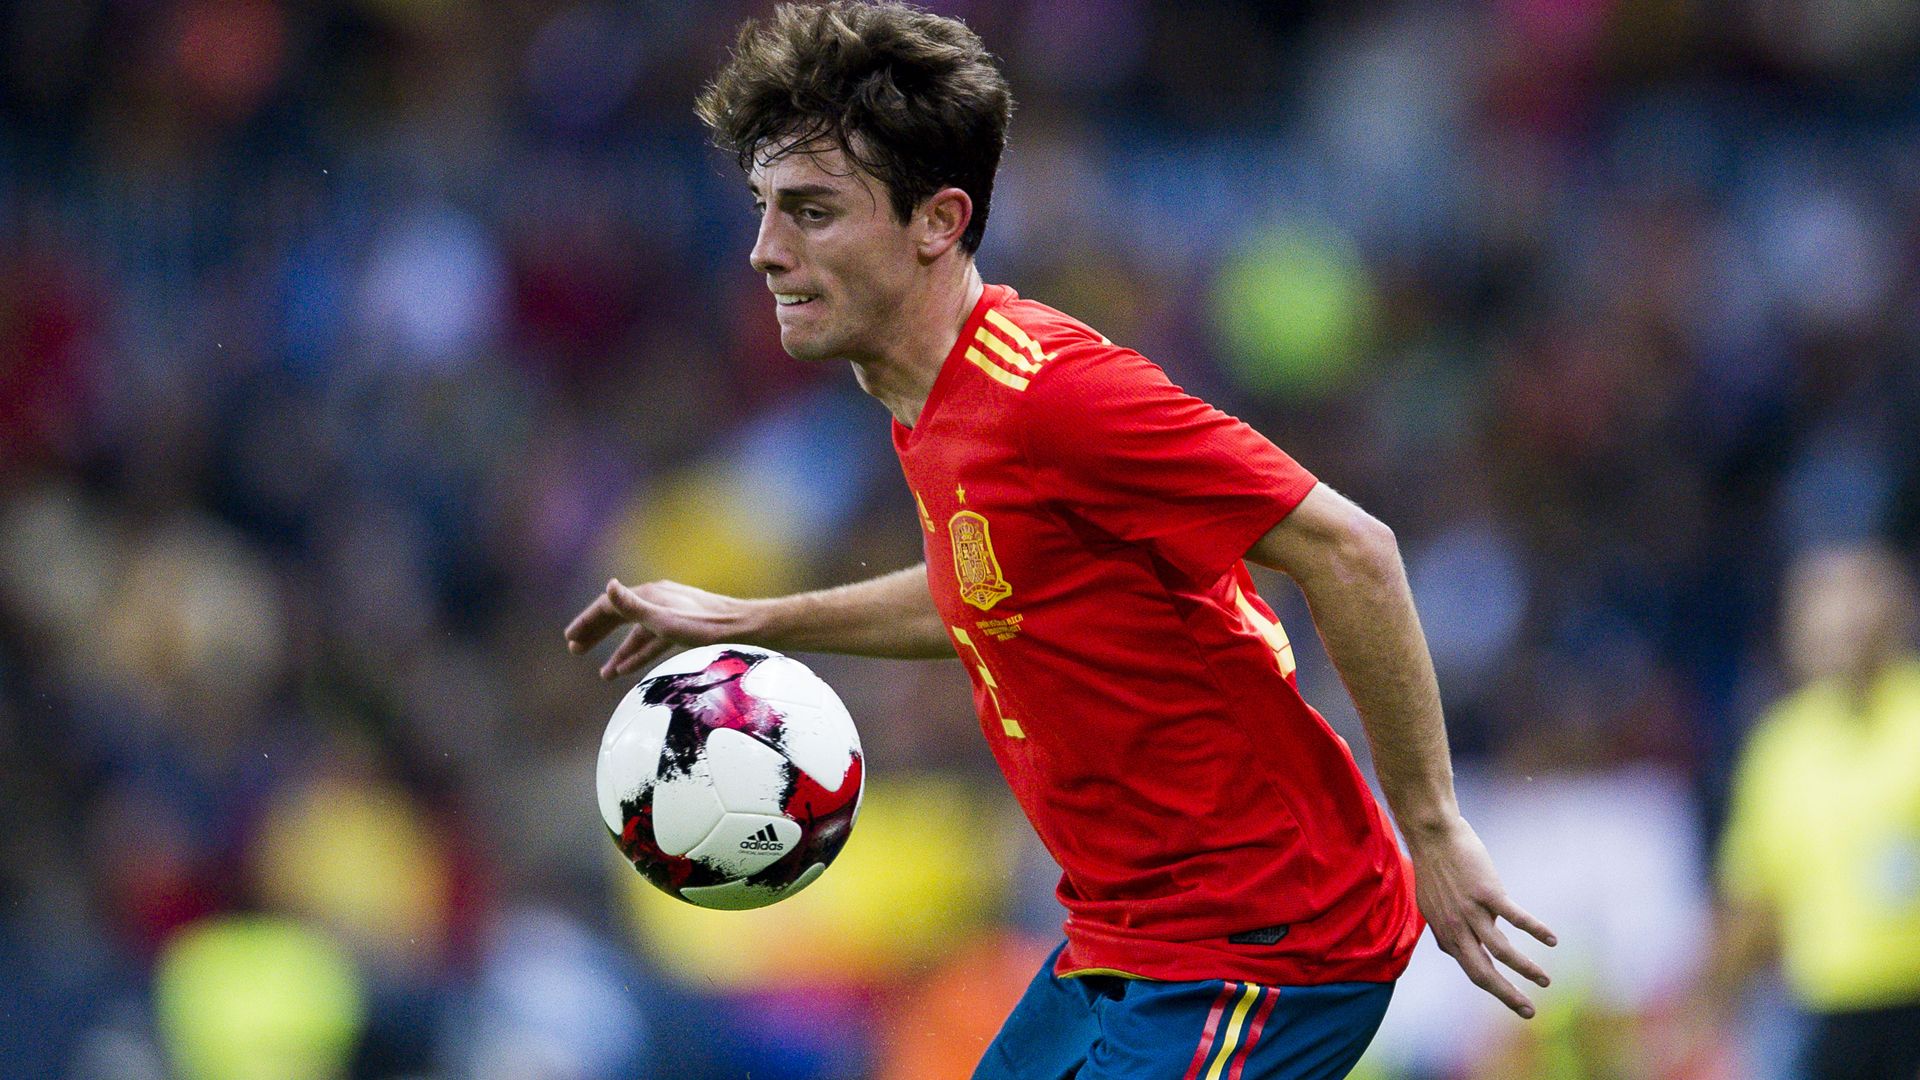 Real Madrid yet to call about Odriozola, says Sociedad president